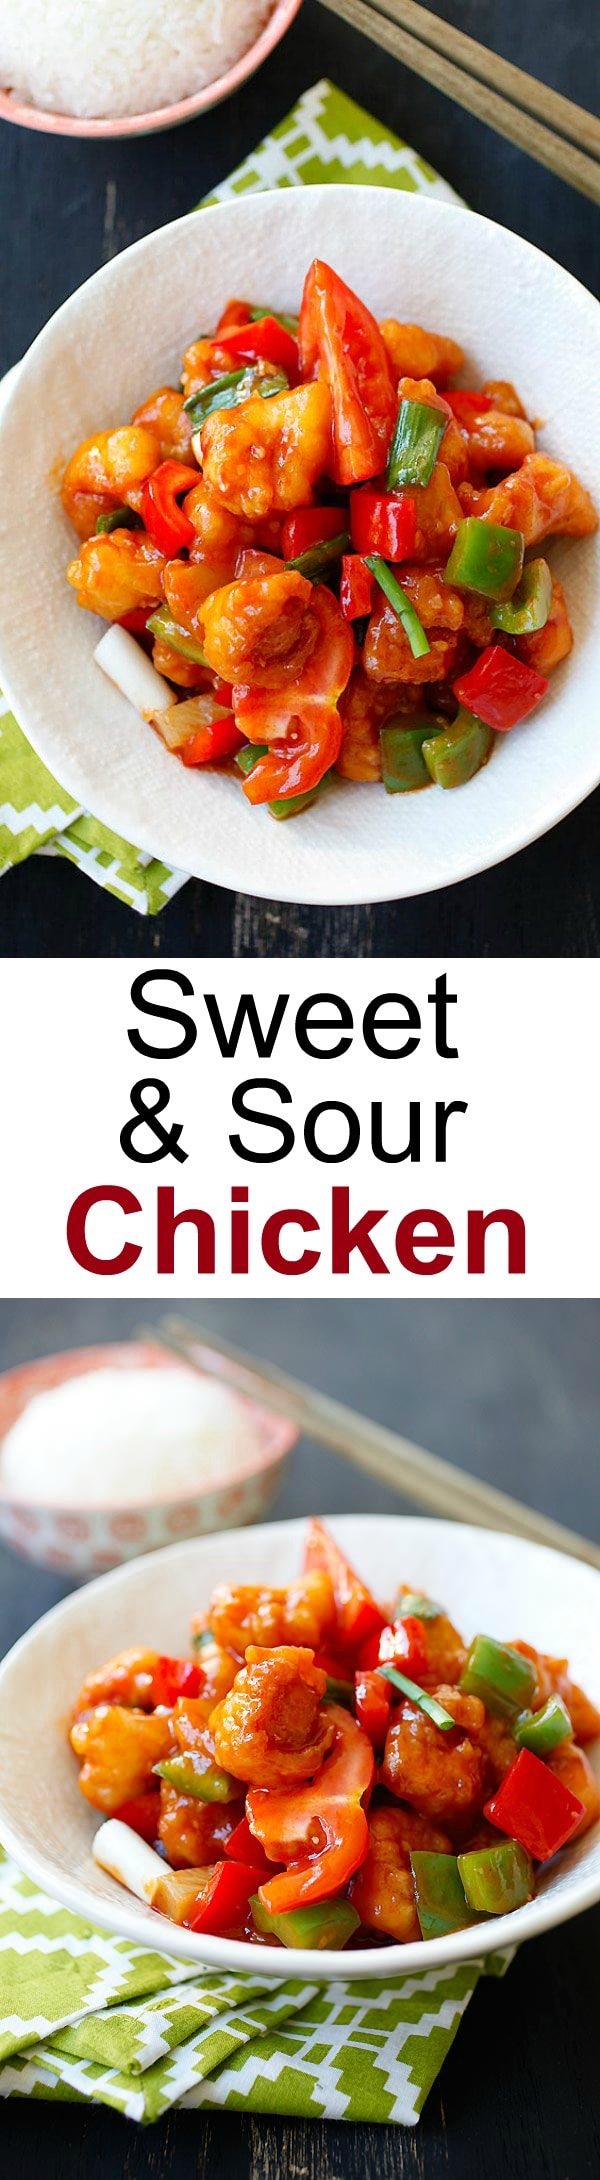 Sweet and sour chicken is a popular Chinese recipe. This healthy and crispy sweet and sour chicken recipe is so delicious with sweet and sour sauce | rasamalaysia.com